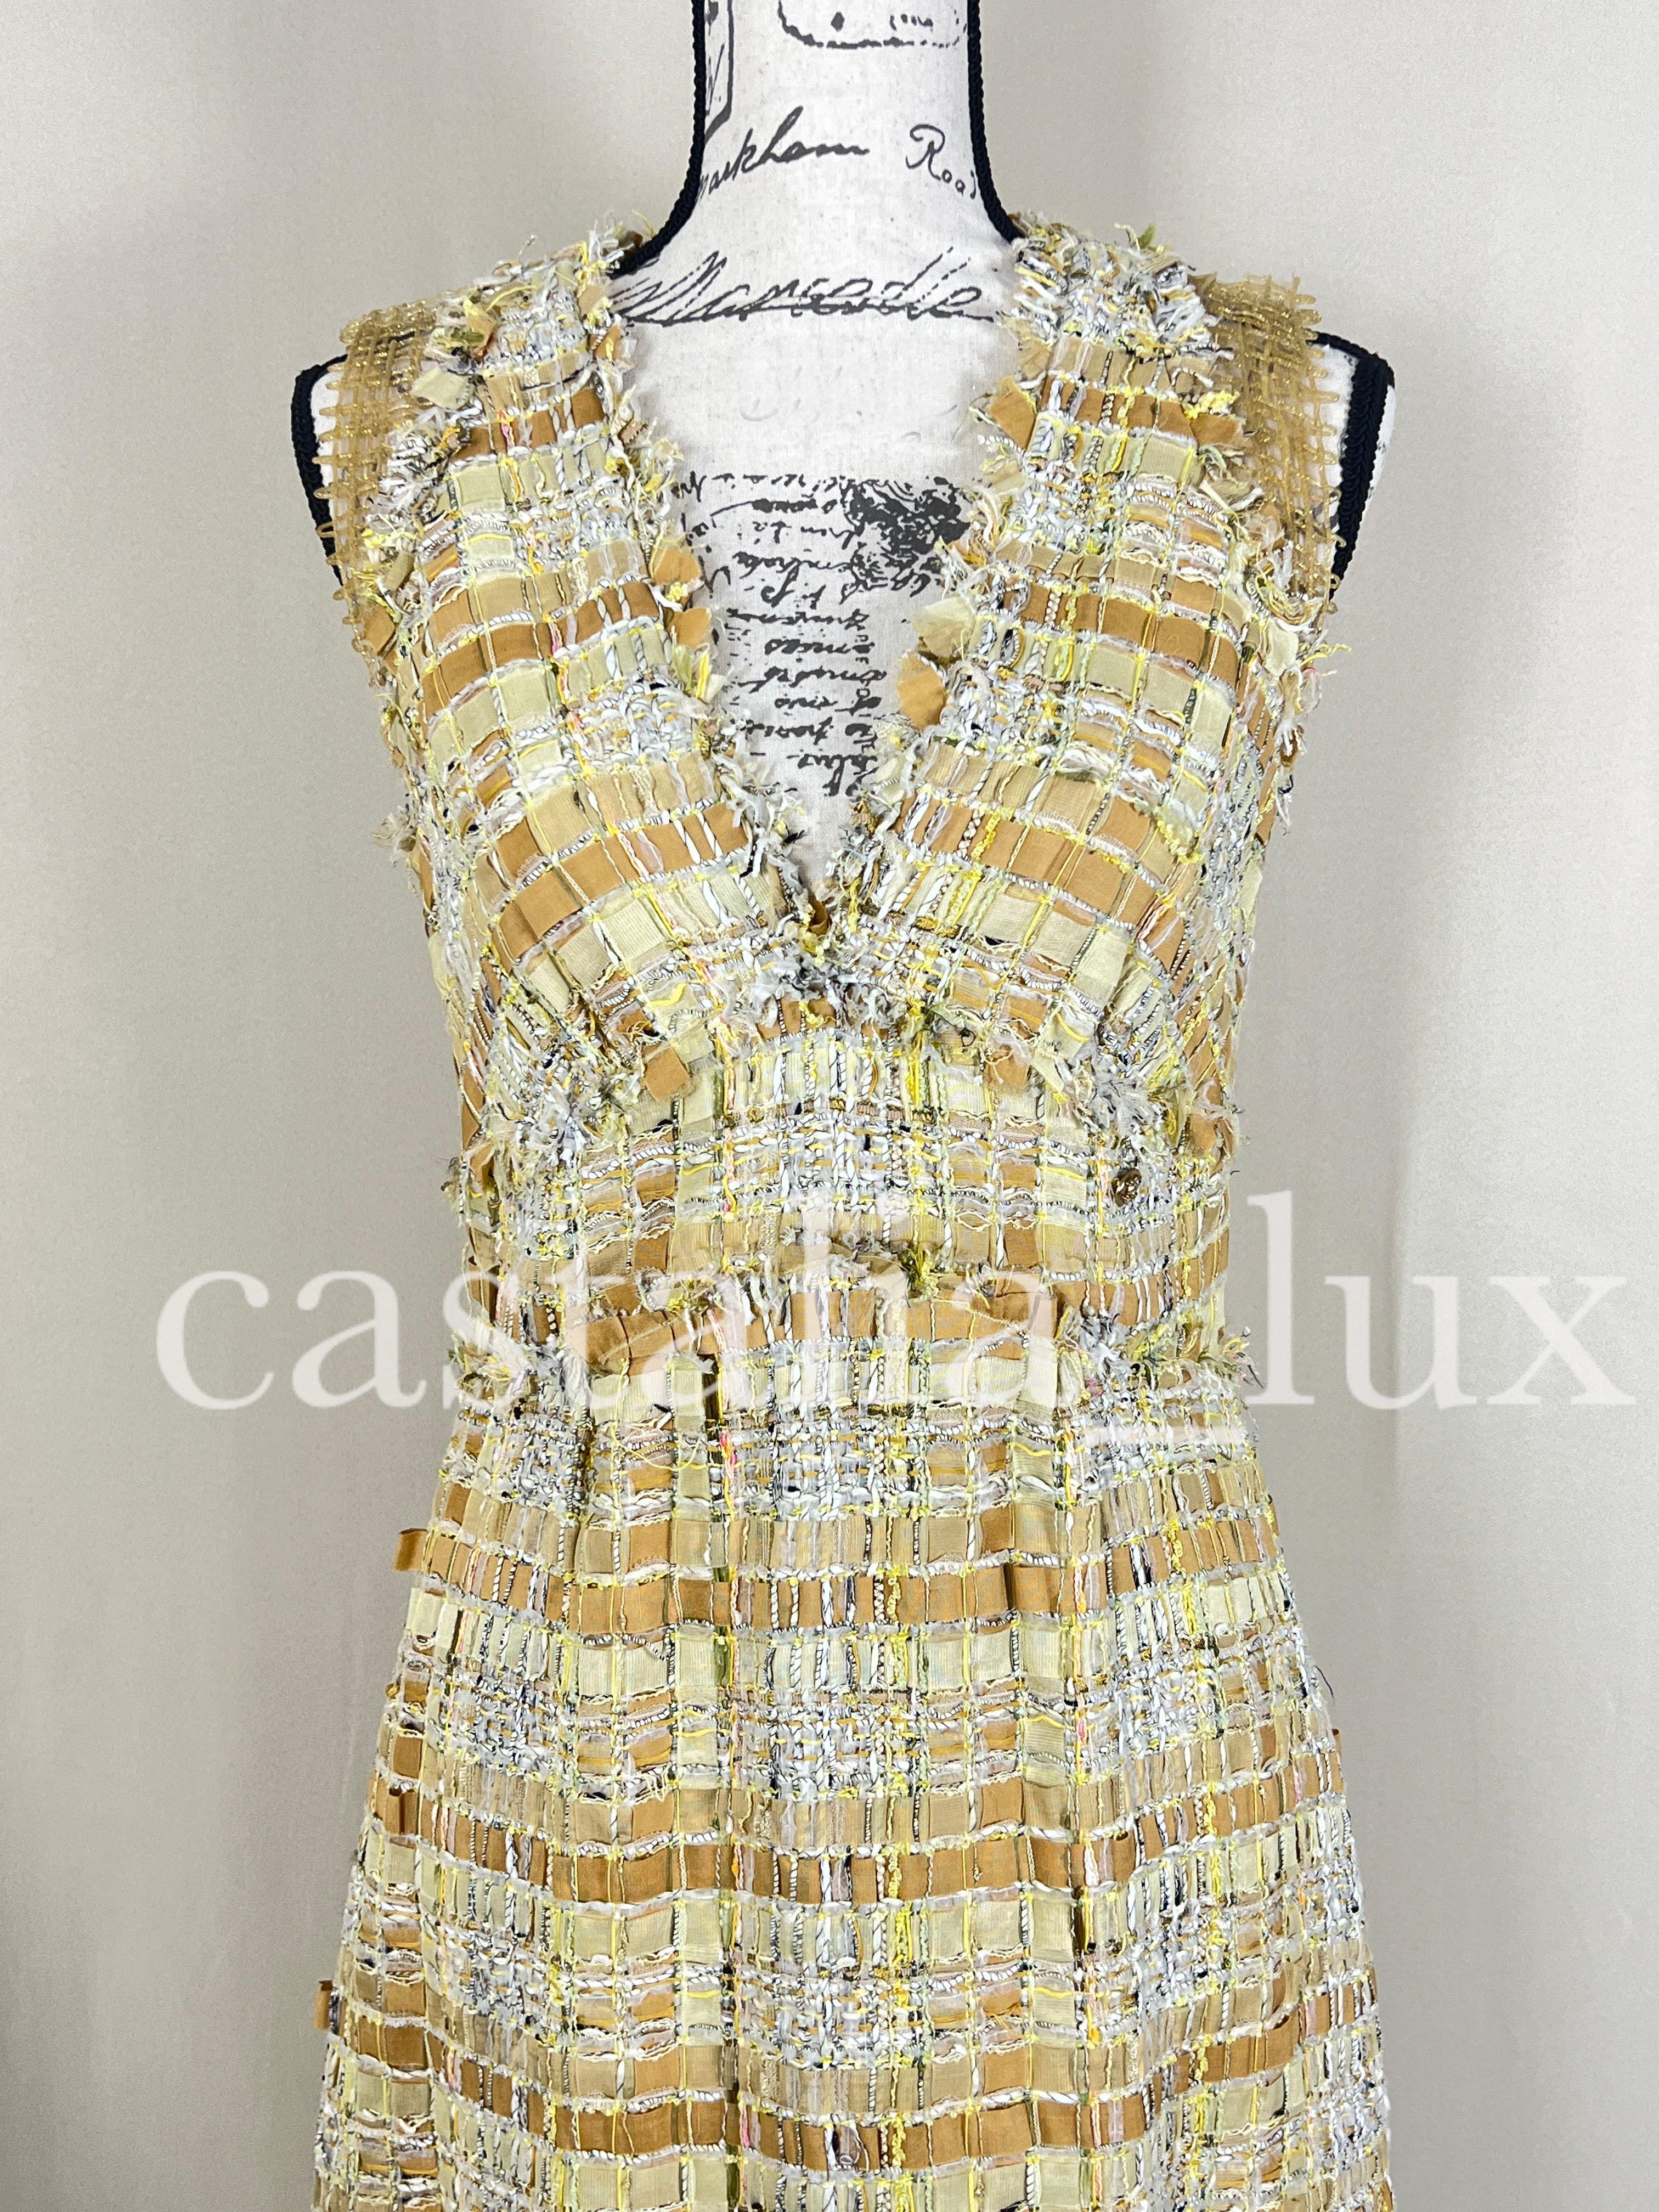 New stunning Chanel dress made of most precious Ribbon tweed -- current price of Chanel boutique for dresses in this kind of tweed starts from 10,000€
Size mark 38 FR. Never worn.
- CC logo charm at waist
- magnificent beige tones
- woven detailing